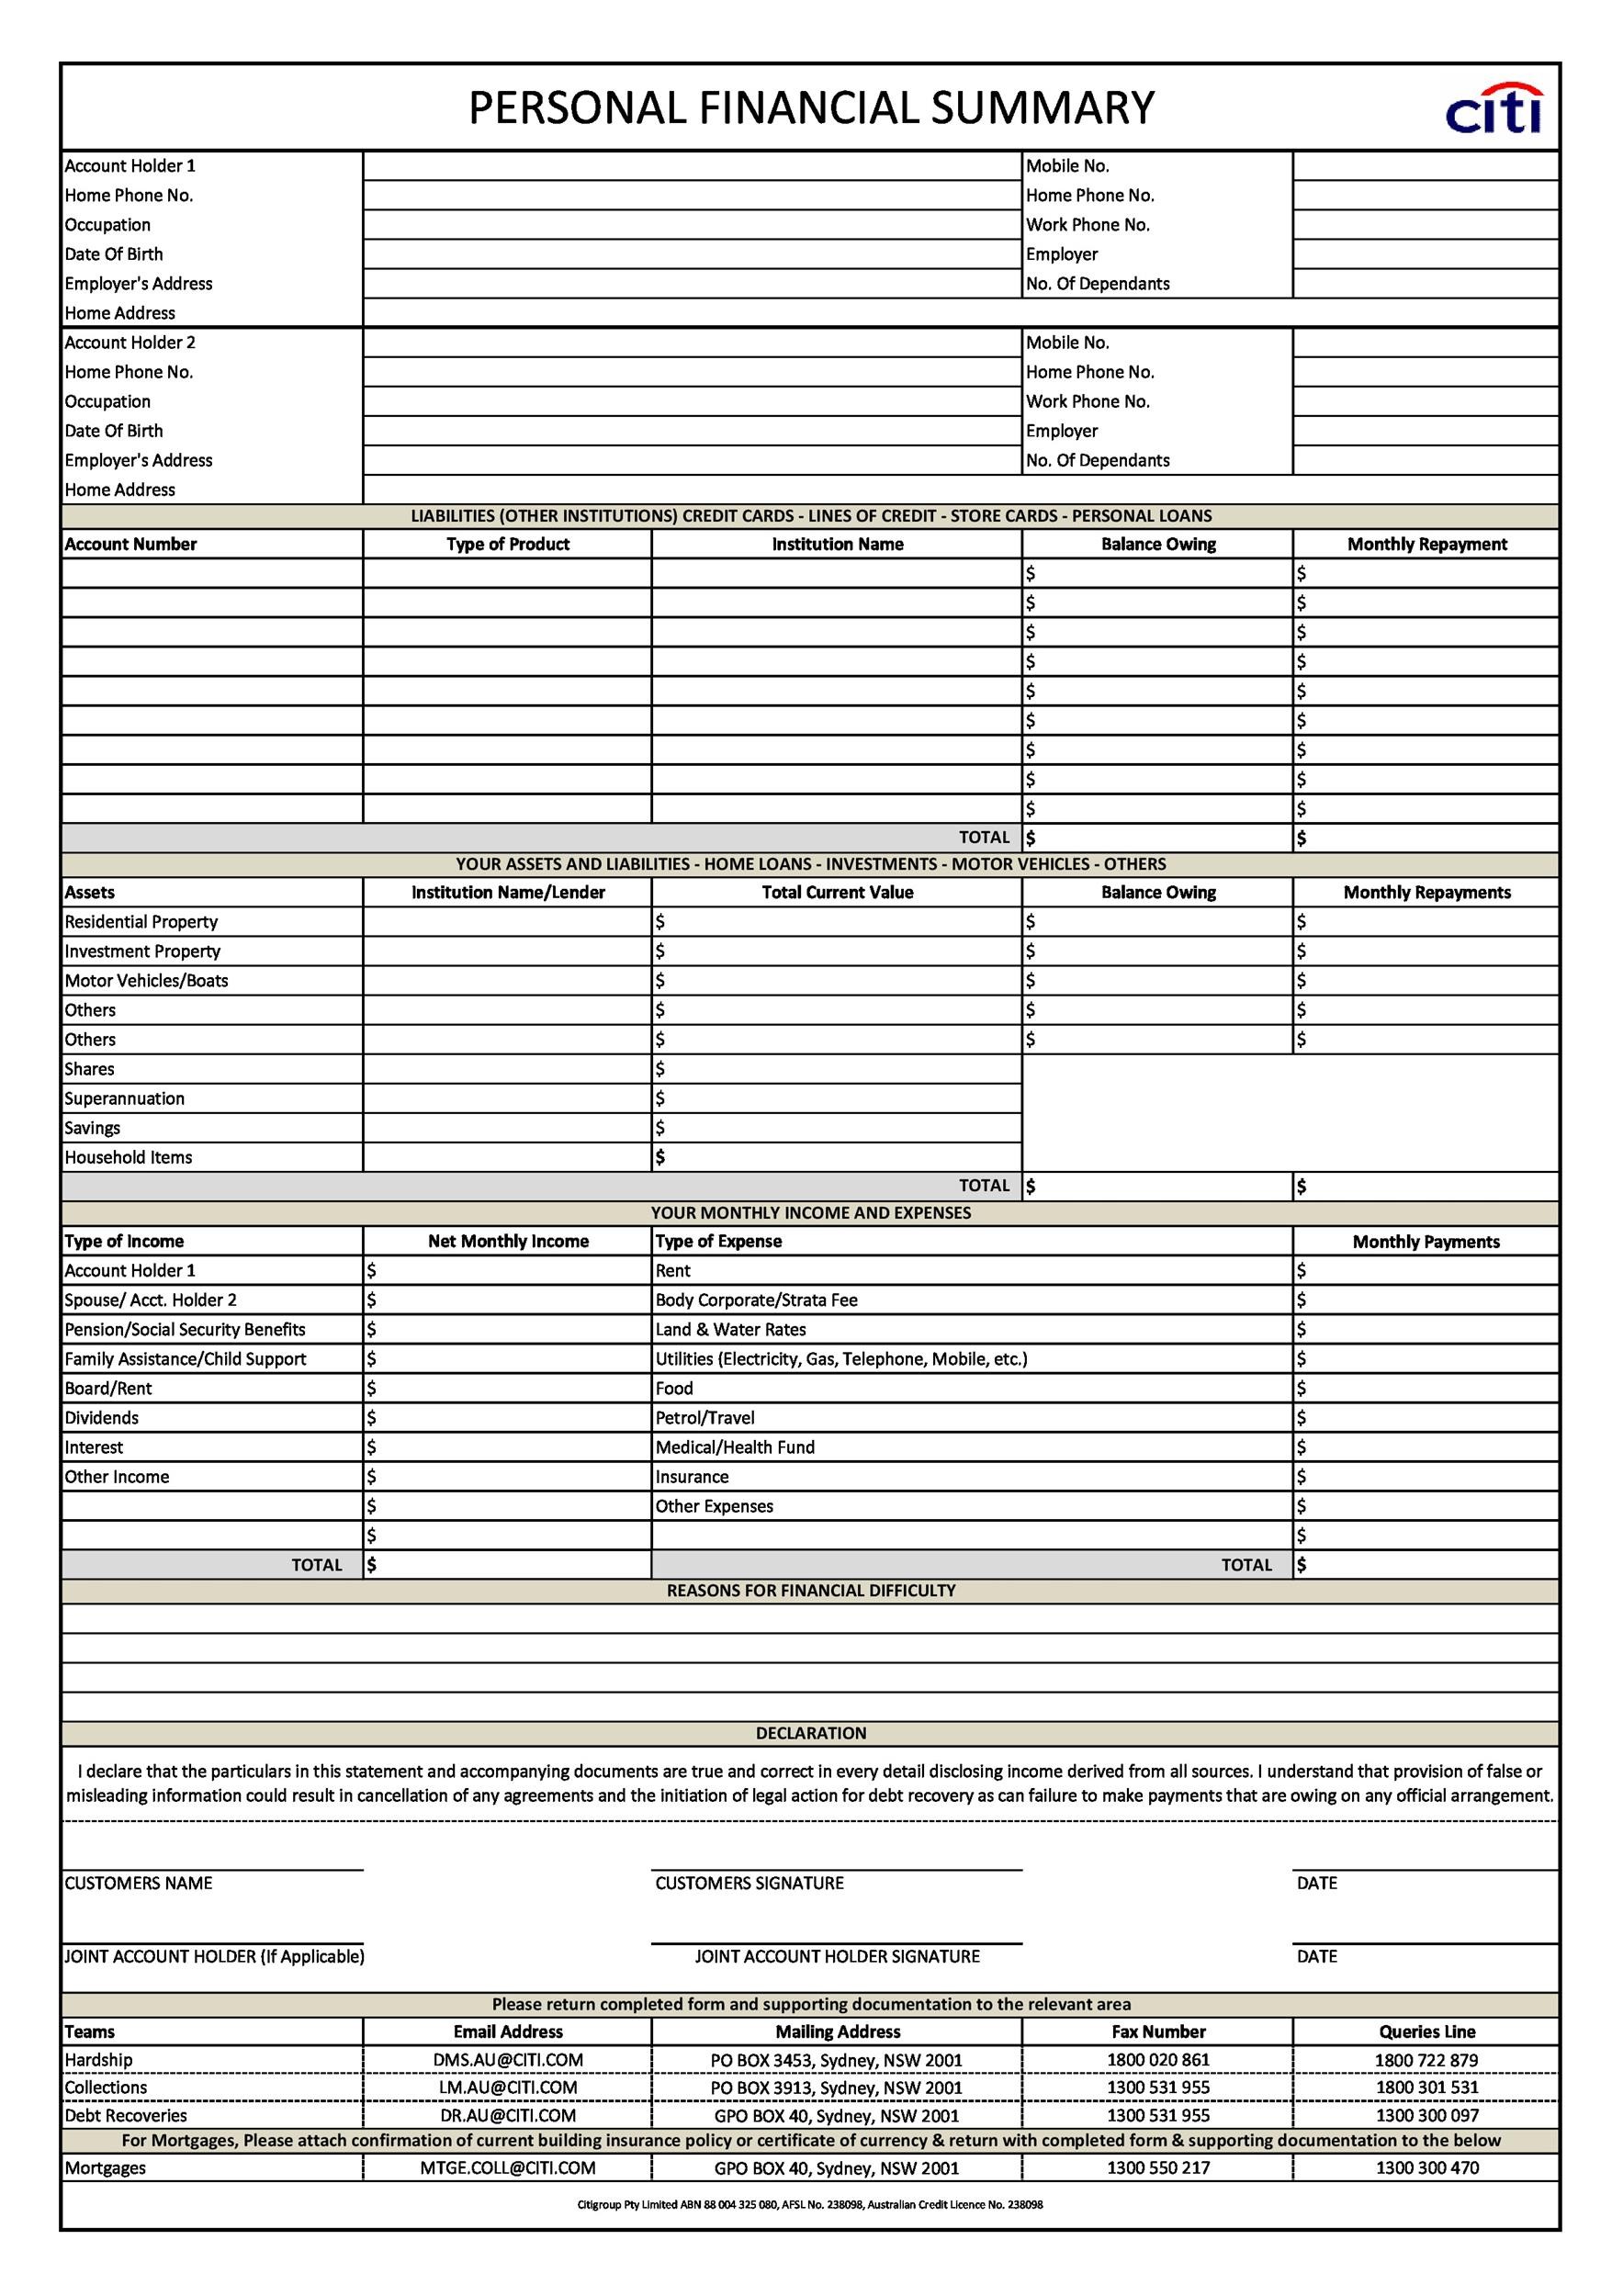 40+ Personal Financial Statement Templates & Forms - TemplateLab